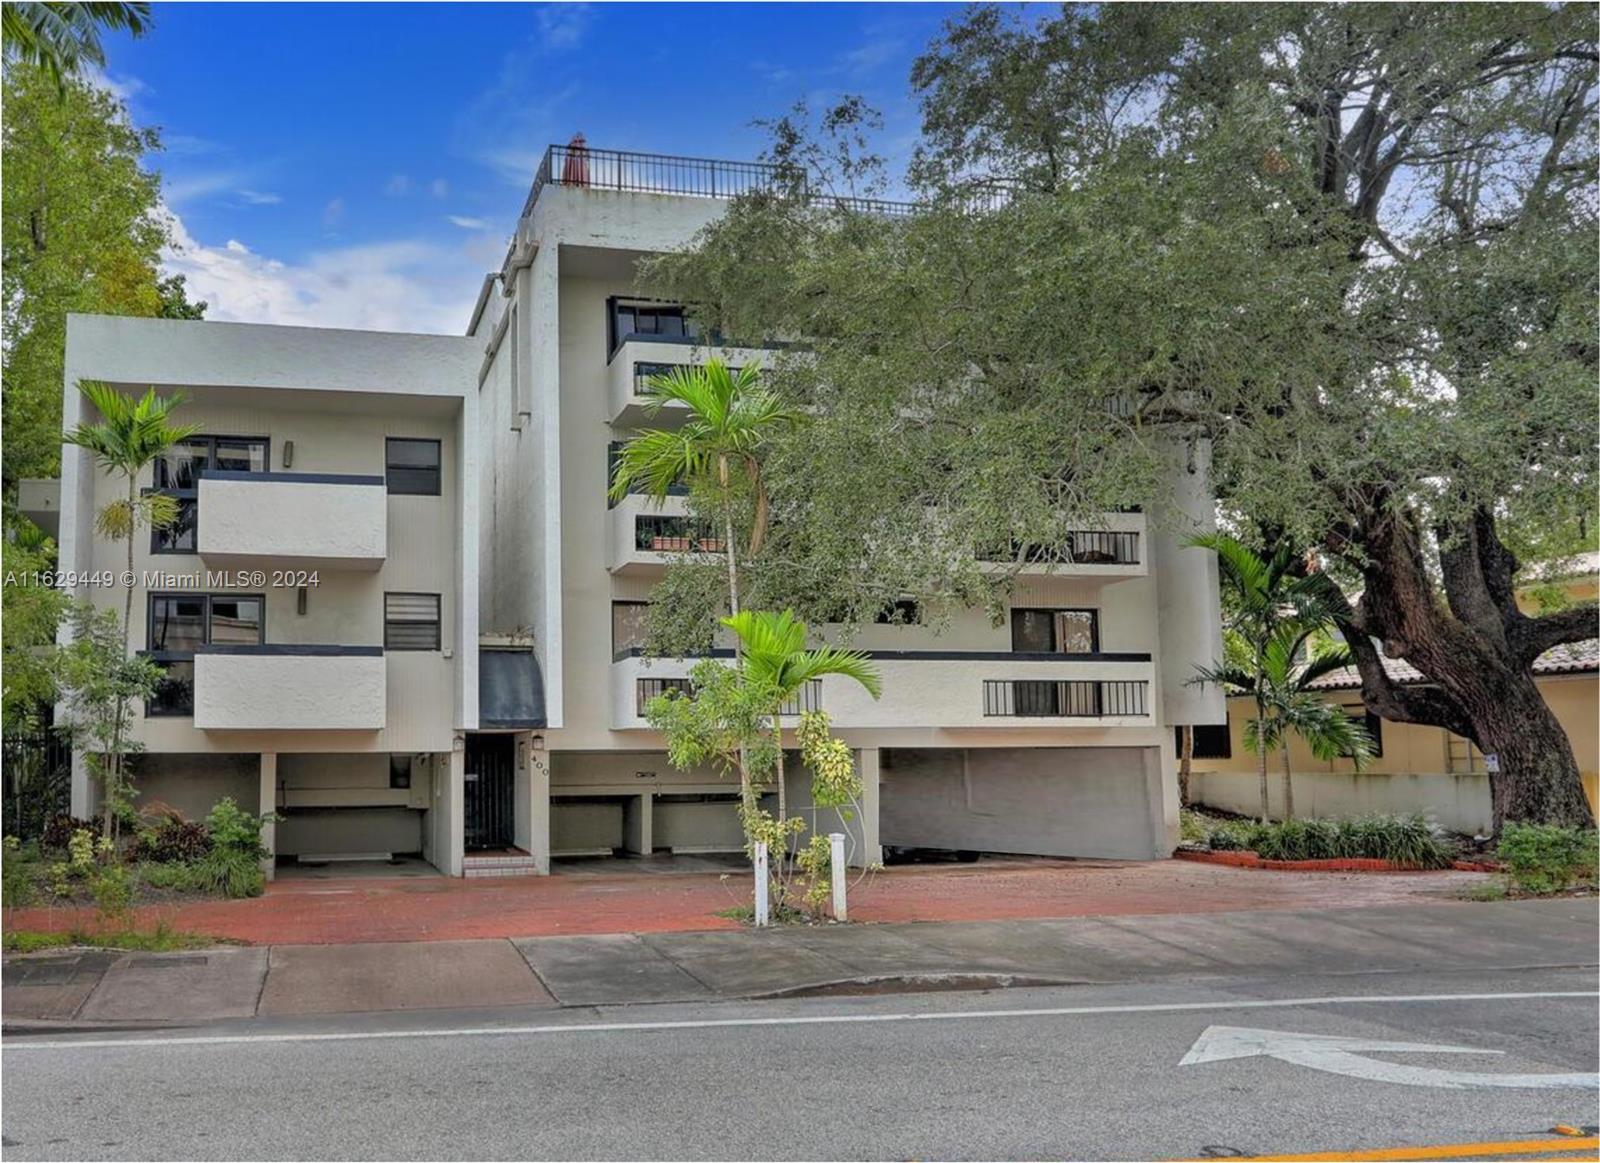 Experience the charm and convenience of Coral Gables with this unique 2-bedroom, 2.5-bathroom ground-floor townhome, nestled in a boutique 7-unit complex. The private corner location provides ample lighting with several balconies to enjoy the outdoors. Beautiful wide plank hardwood floors welcome you in. Enjoy the spacious, renovated kitchen with wood cabinets, and all stainless appliances. The unit features all impact windows and sliding doors, plenty of closet space, plus a private outside storage room adjacent to your assigned parking space. Full-size washer/dryer in the unit. Renters Insurance is require